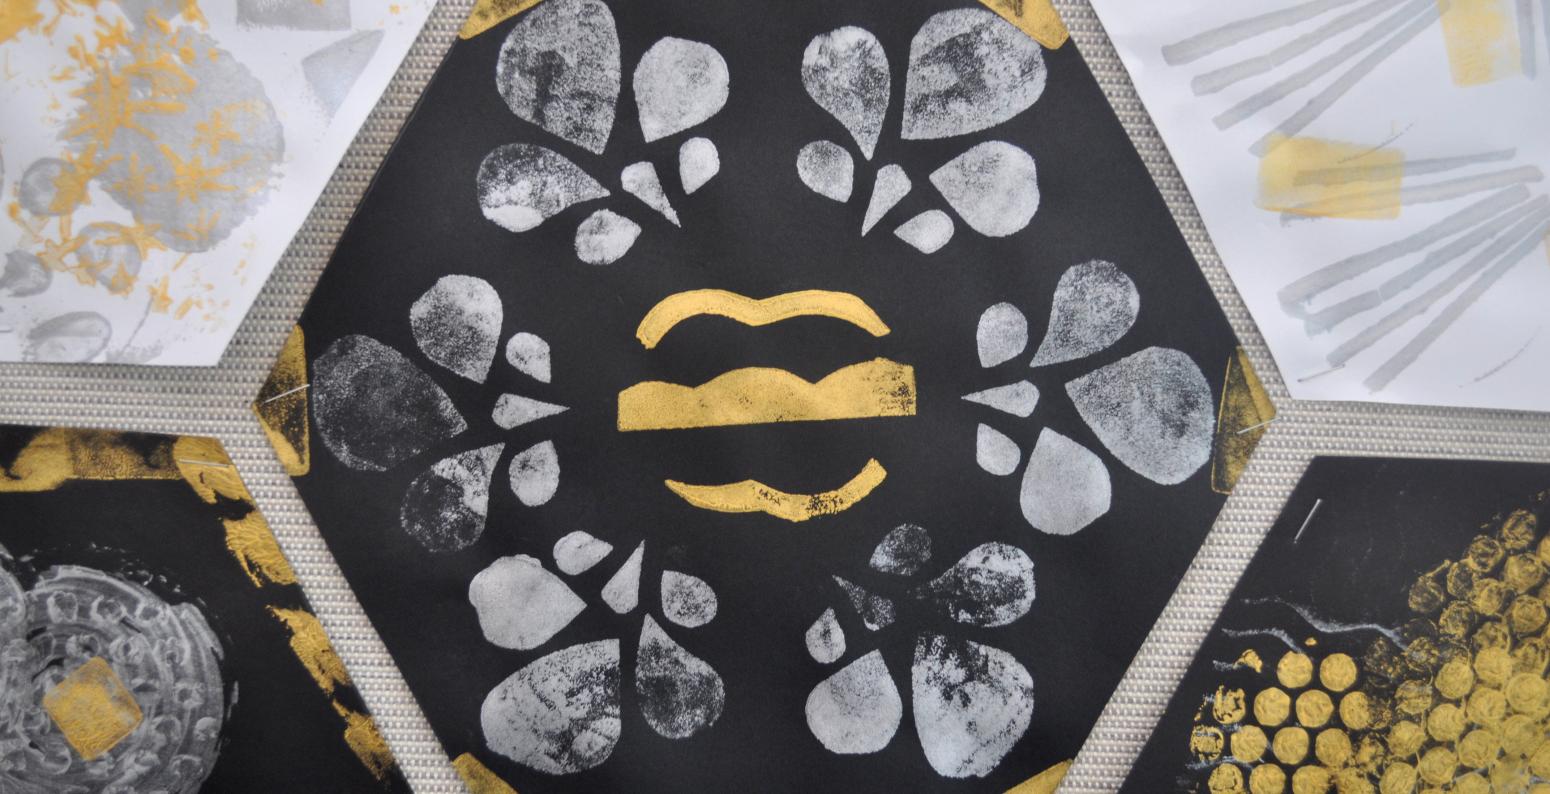 A hexagon-shaped piece of black construction paper with gold and silver stamped shapes on it.